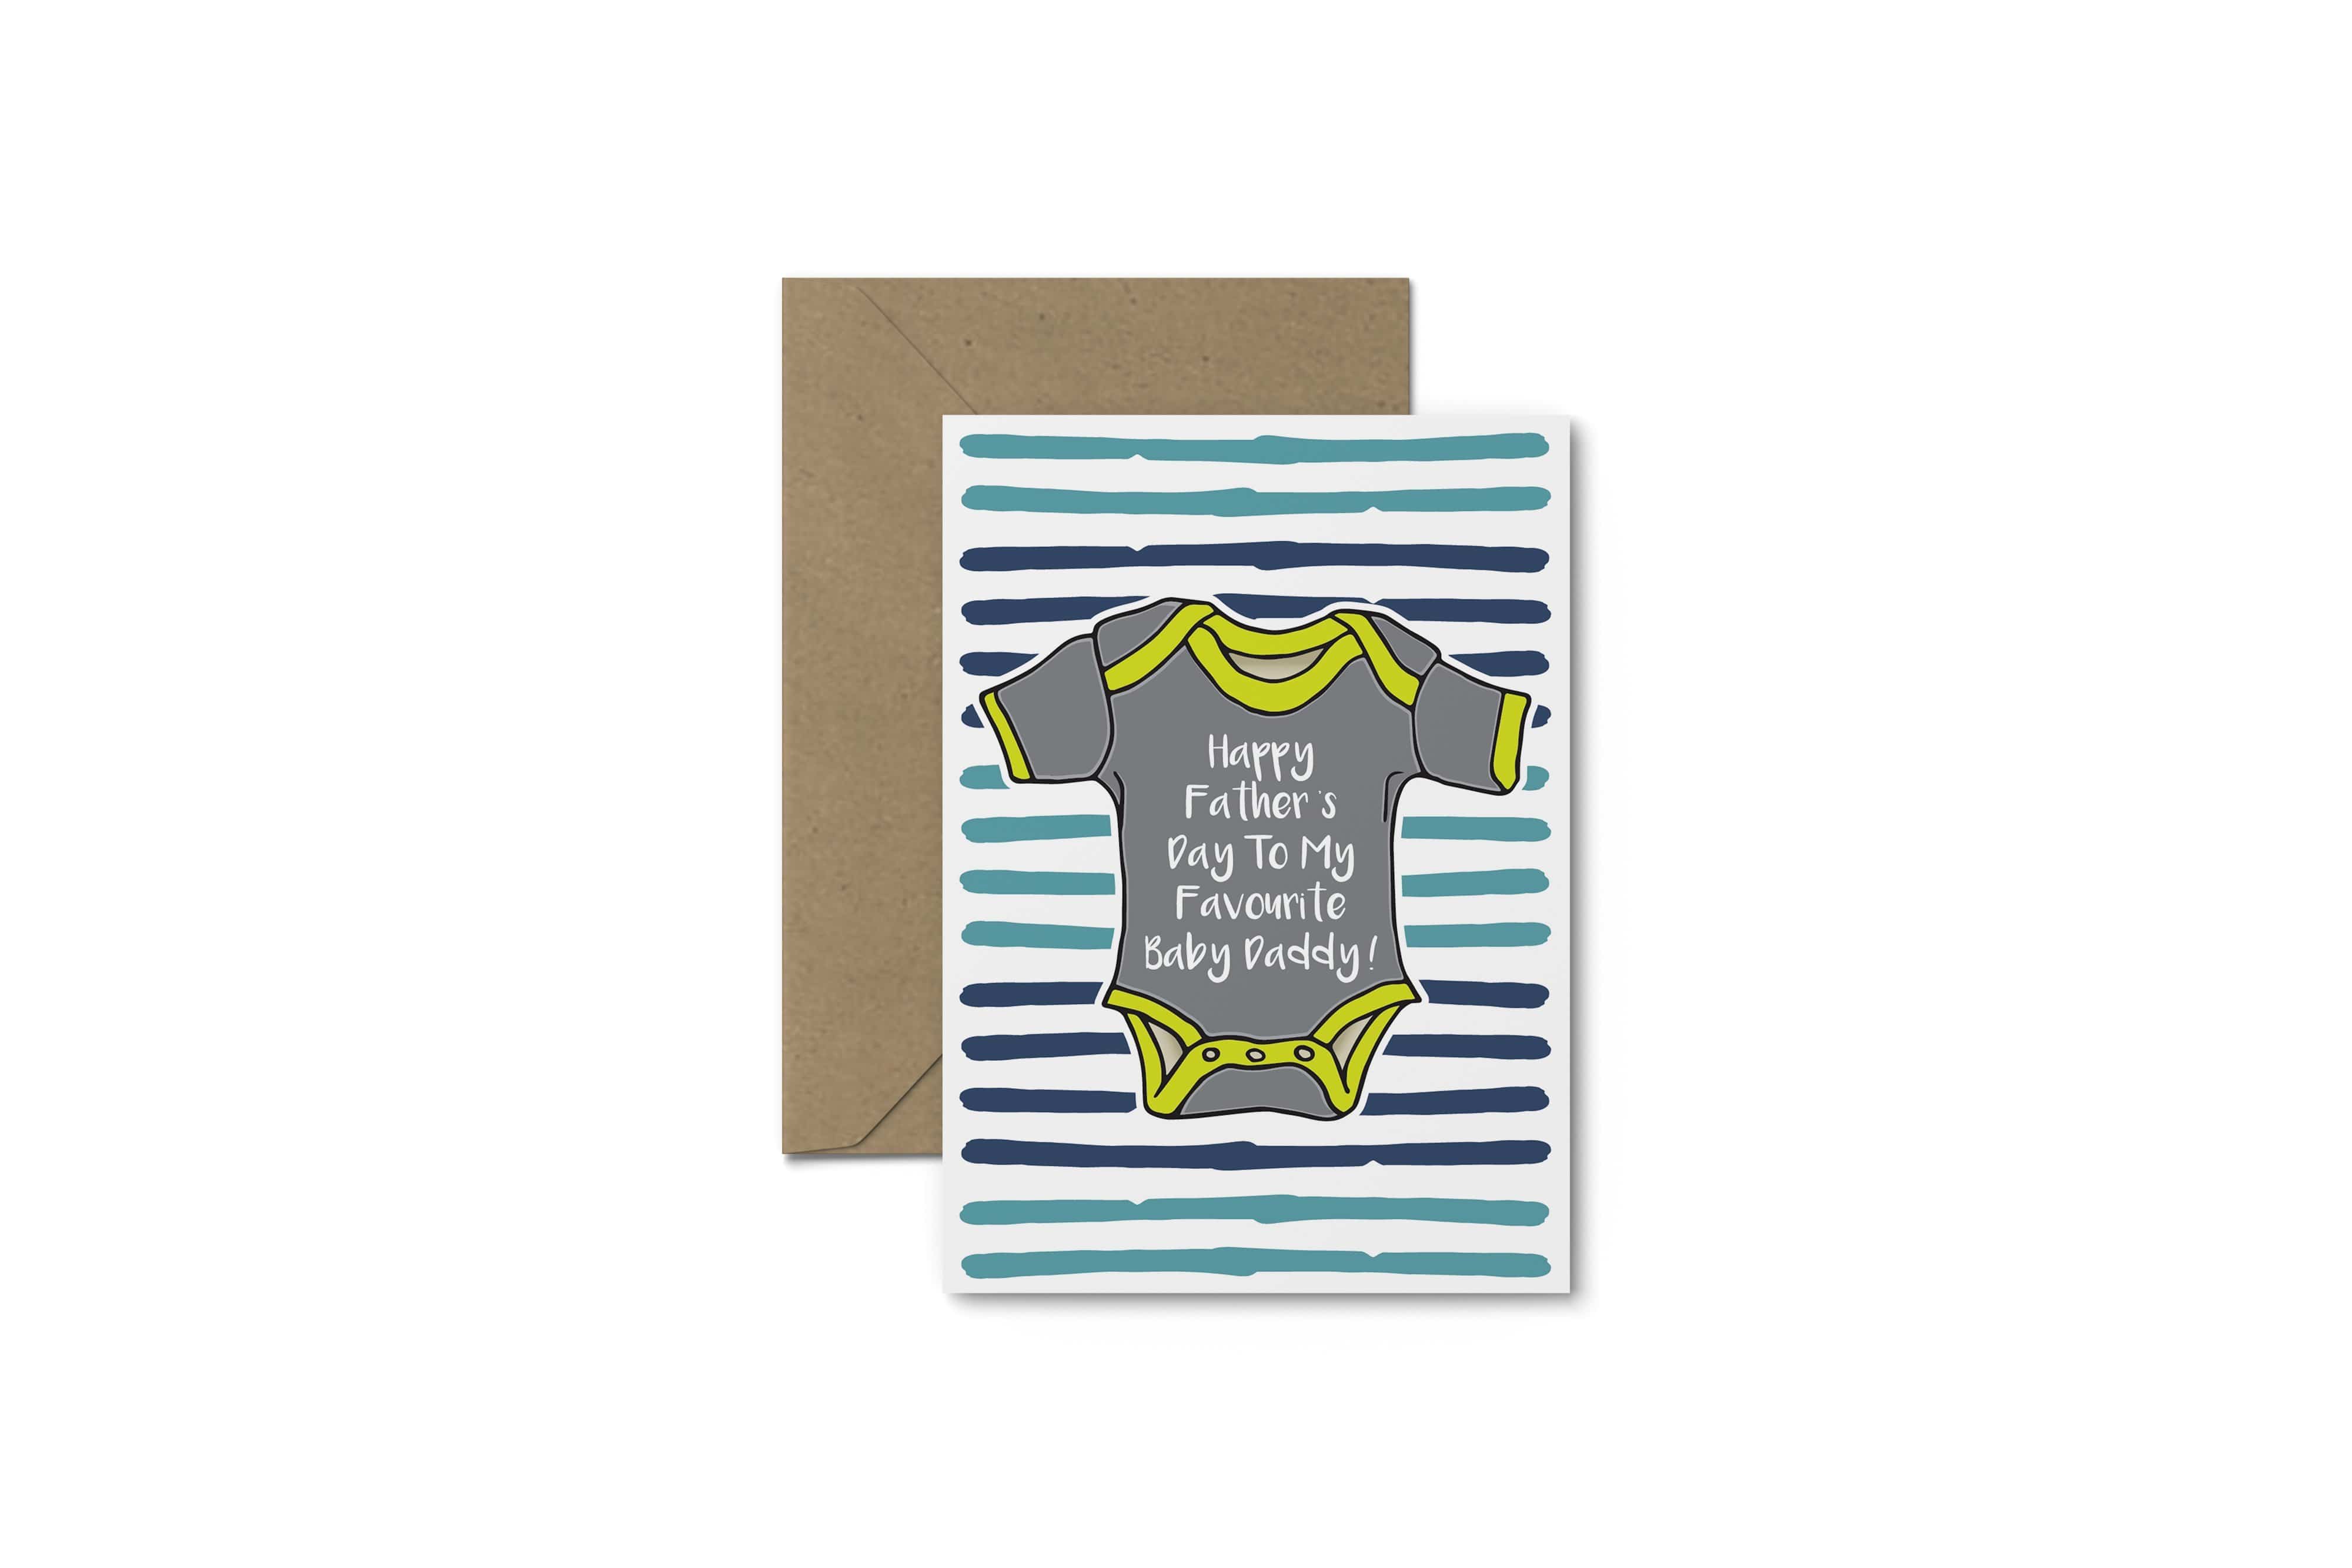 Baby Daddy! Father’s Day Card - South of London